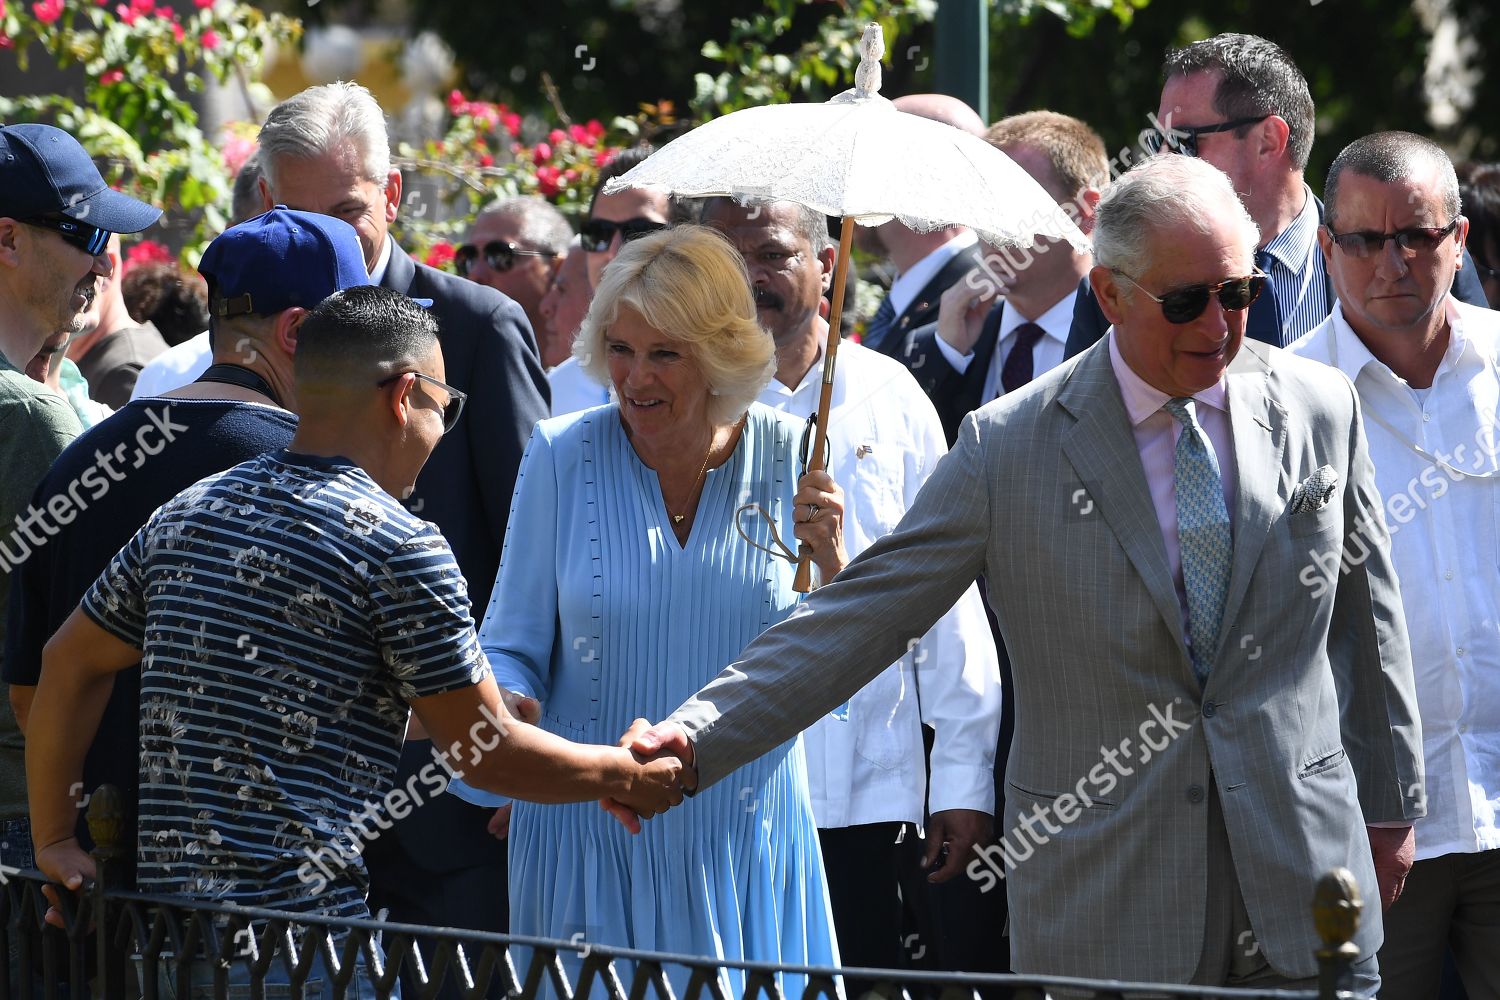 prince-charles-and-camilla-duchess-of-cornwall-caribbean-tour-cuba-shutterstock-editorial-10167332s.jpg